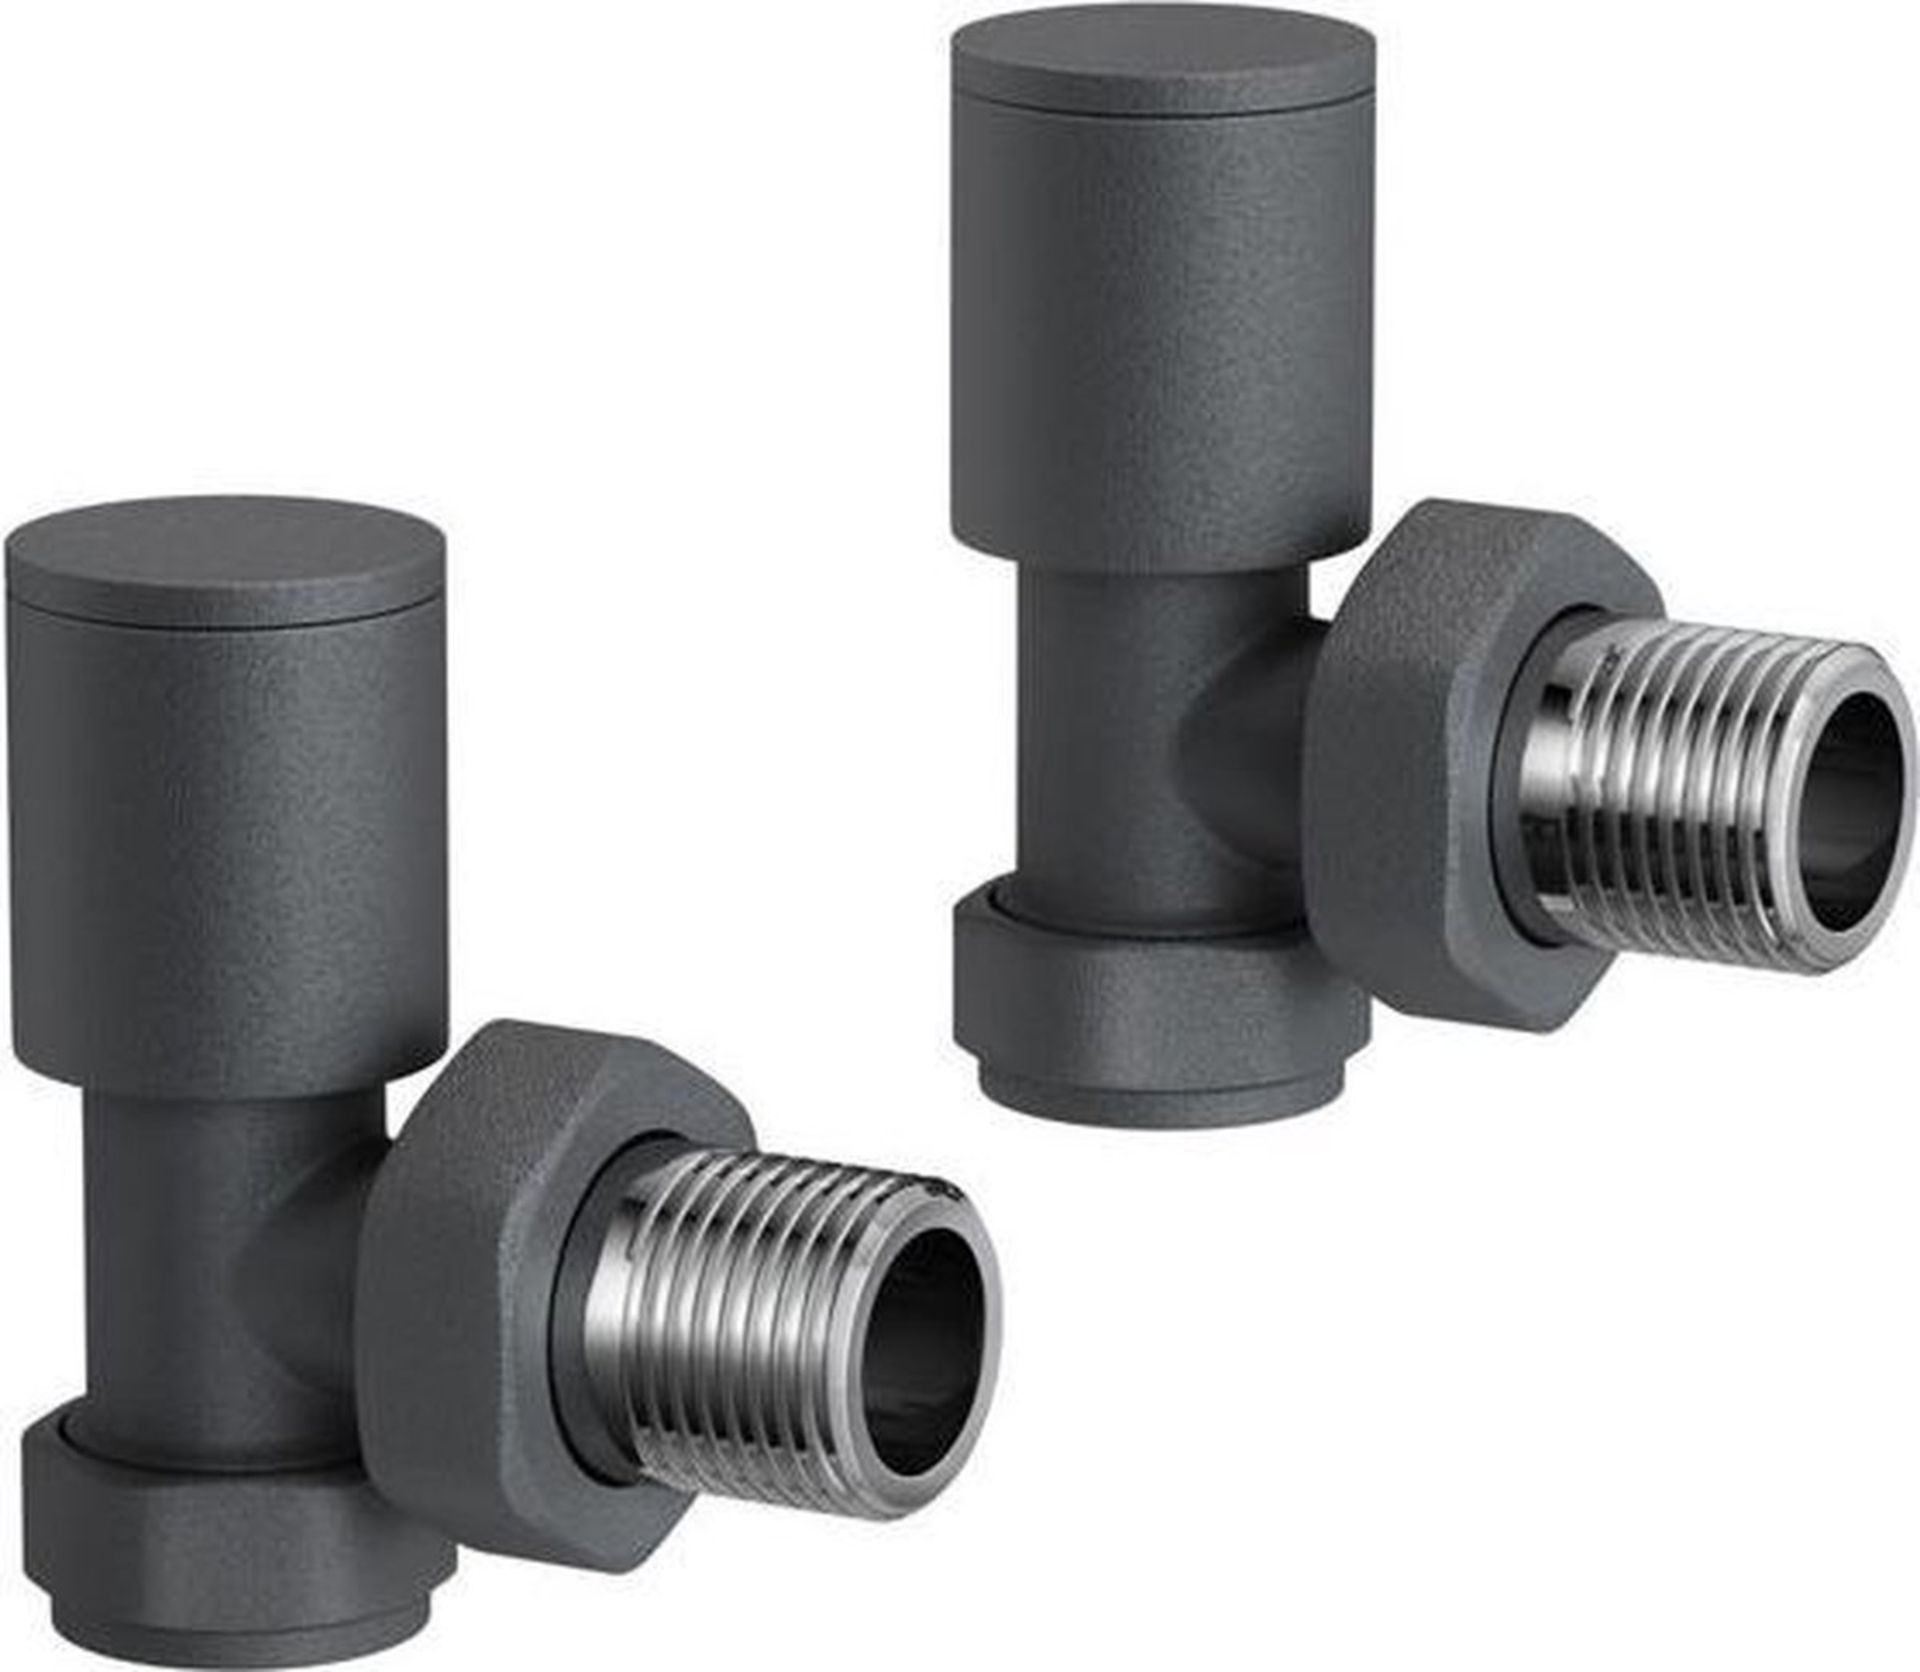 New & Boxed 15 mm Standard Connection Round Angled Anthracite Radiator Valves. Ra03A. Compli...